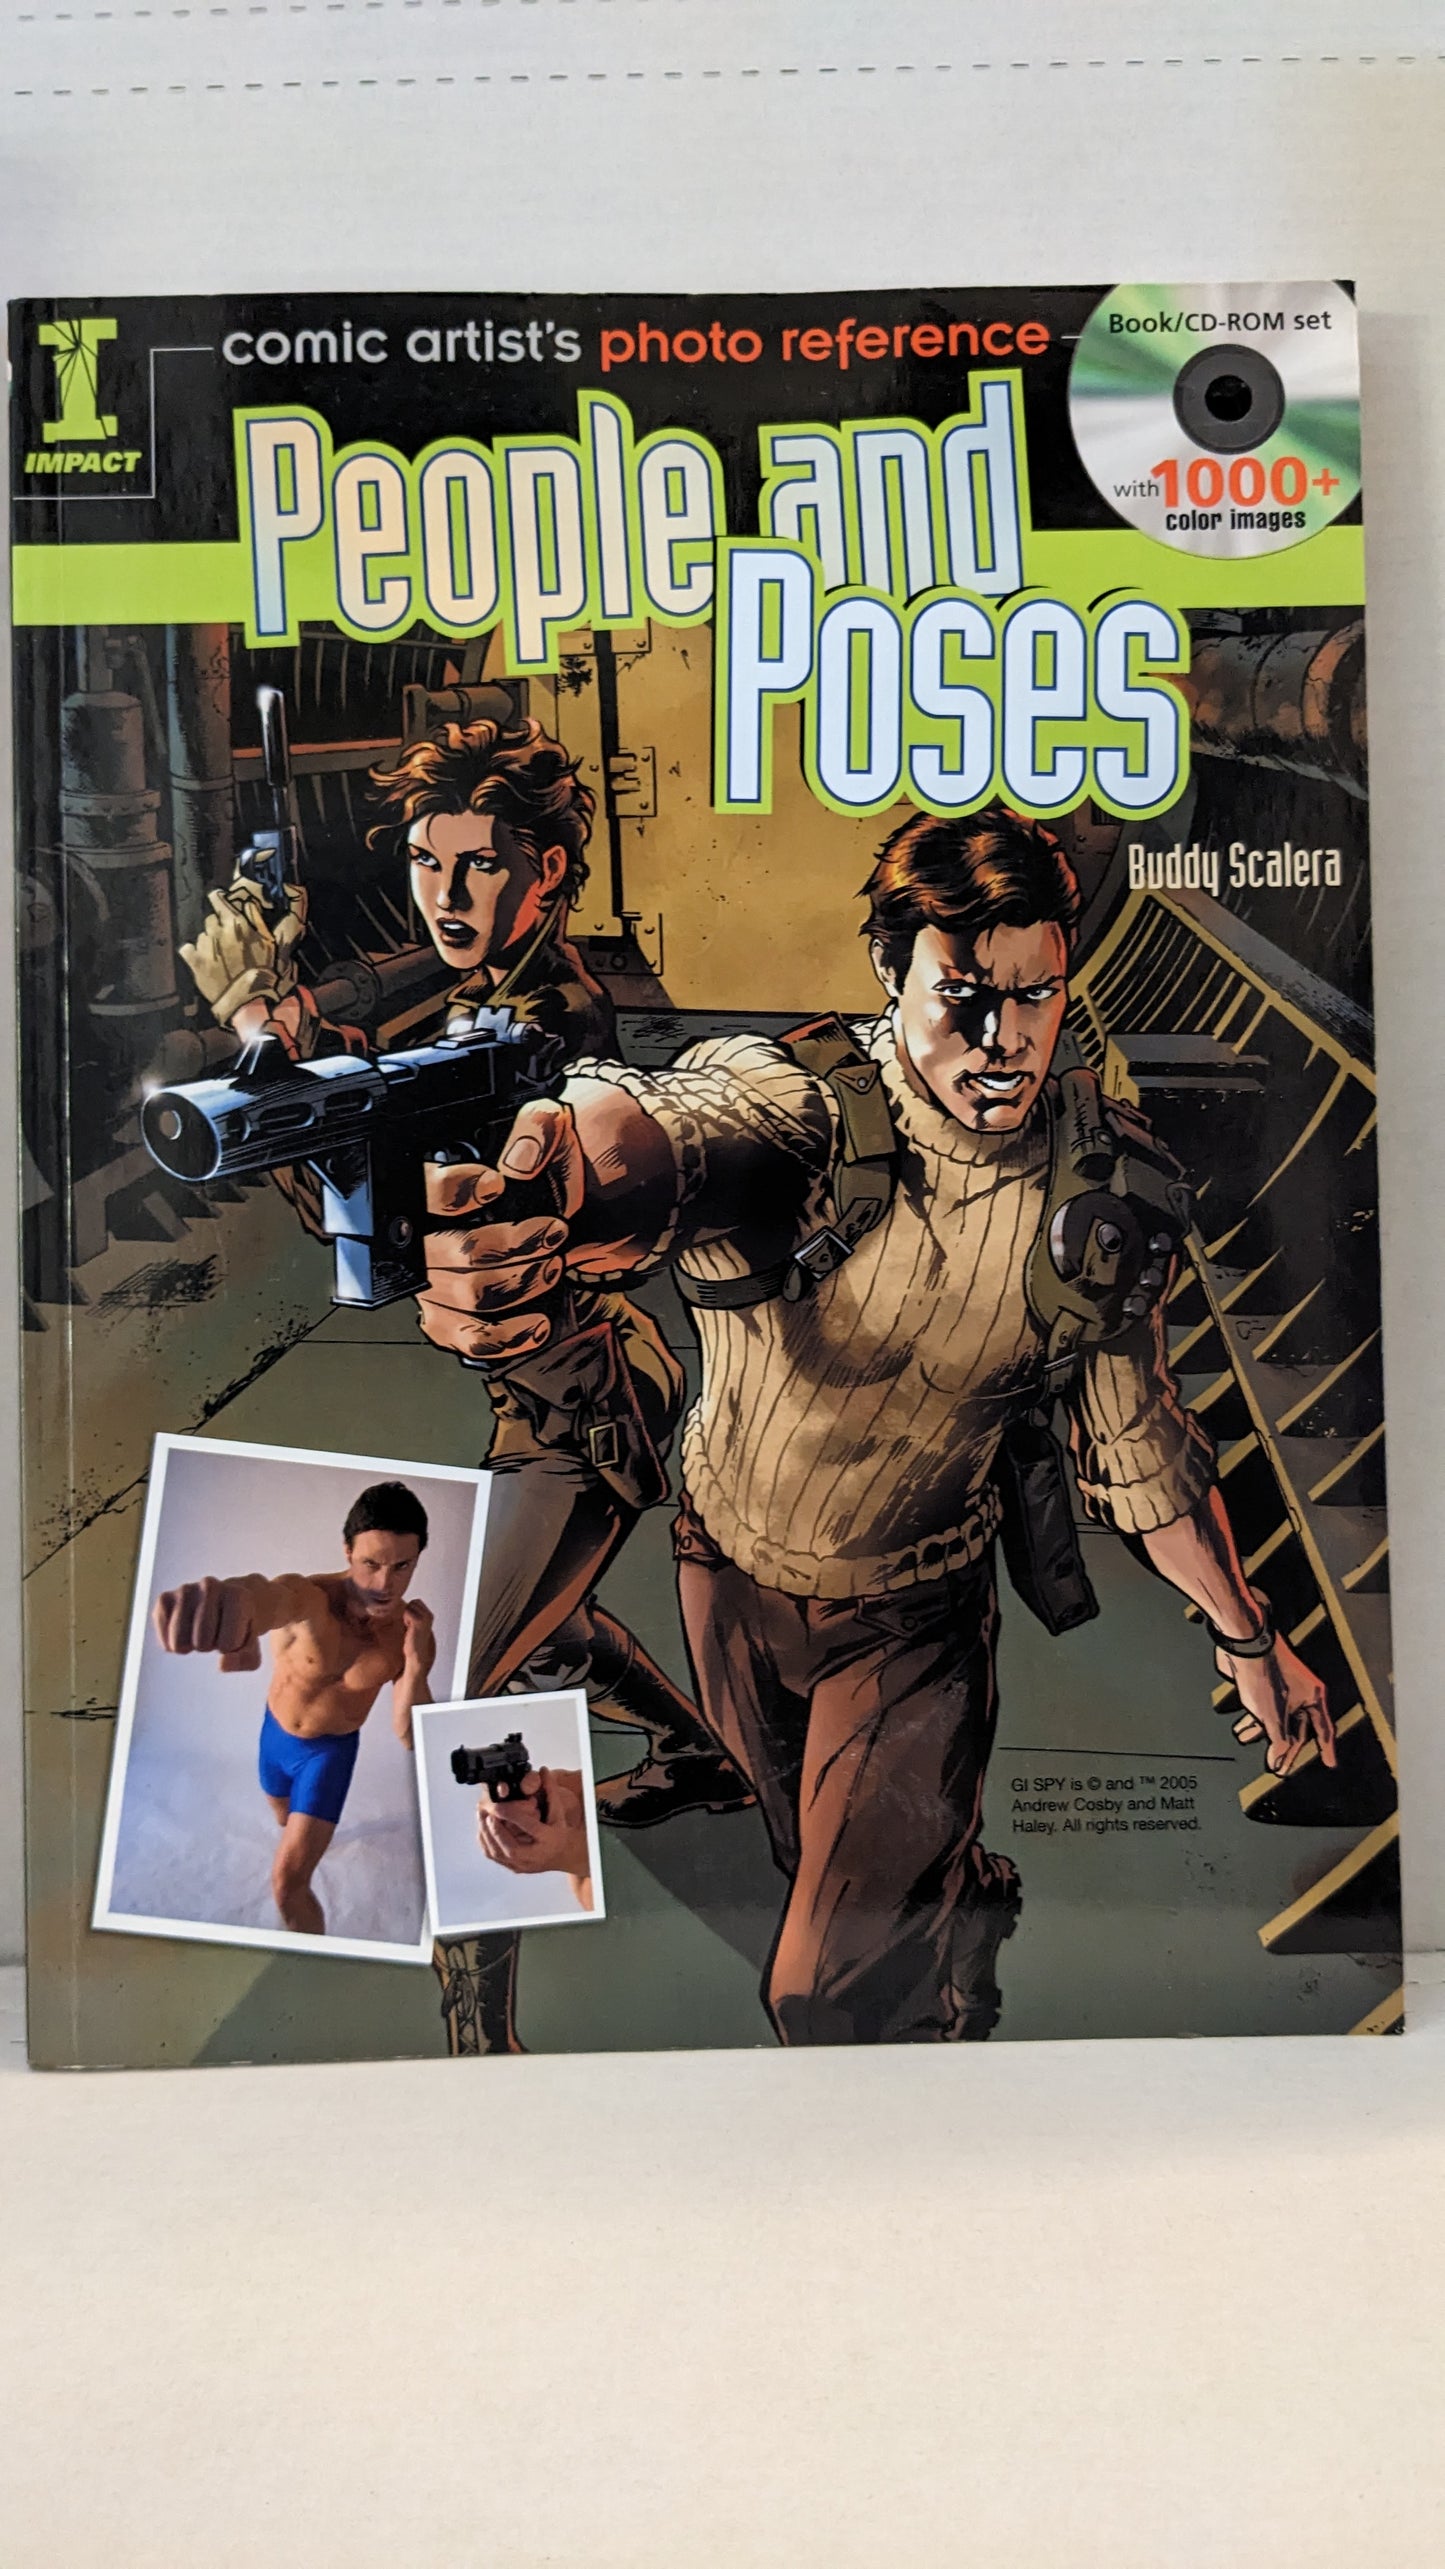 Comic Artist's Photo Reference - People & Poses: Book/CD Set with 1000+ Color Images Paperback – May 24, 2006